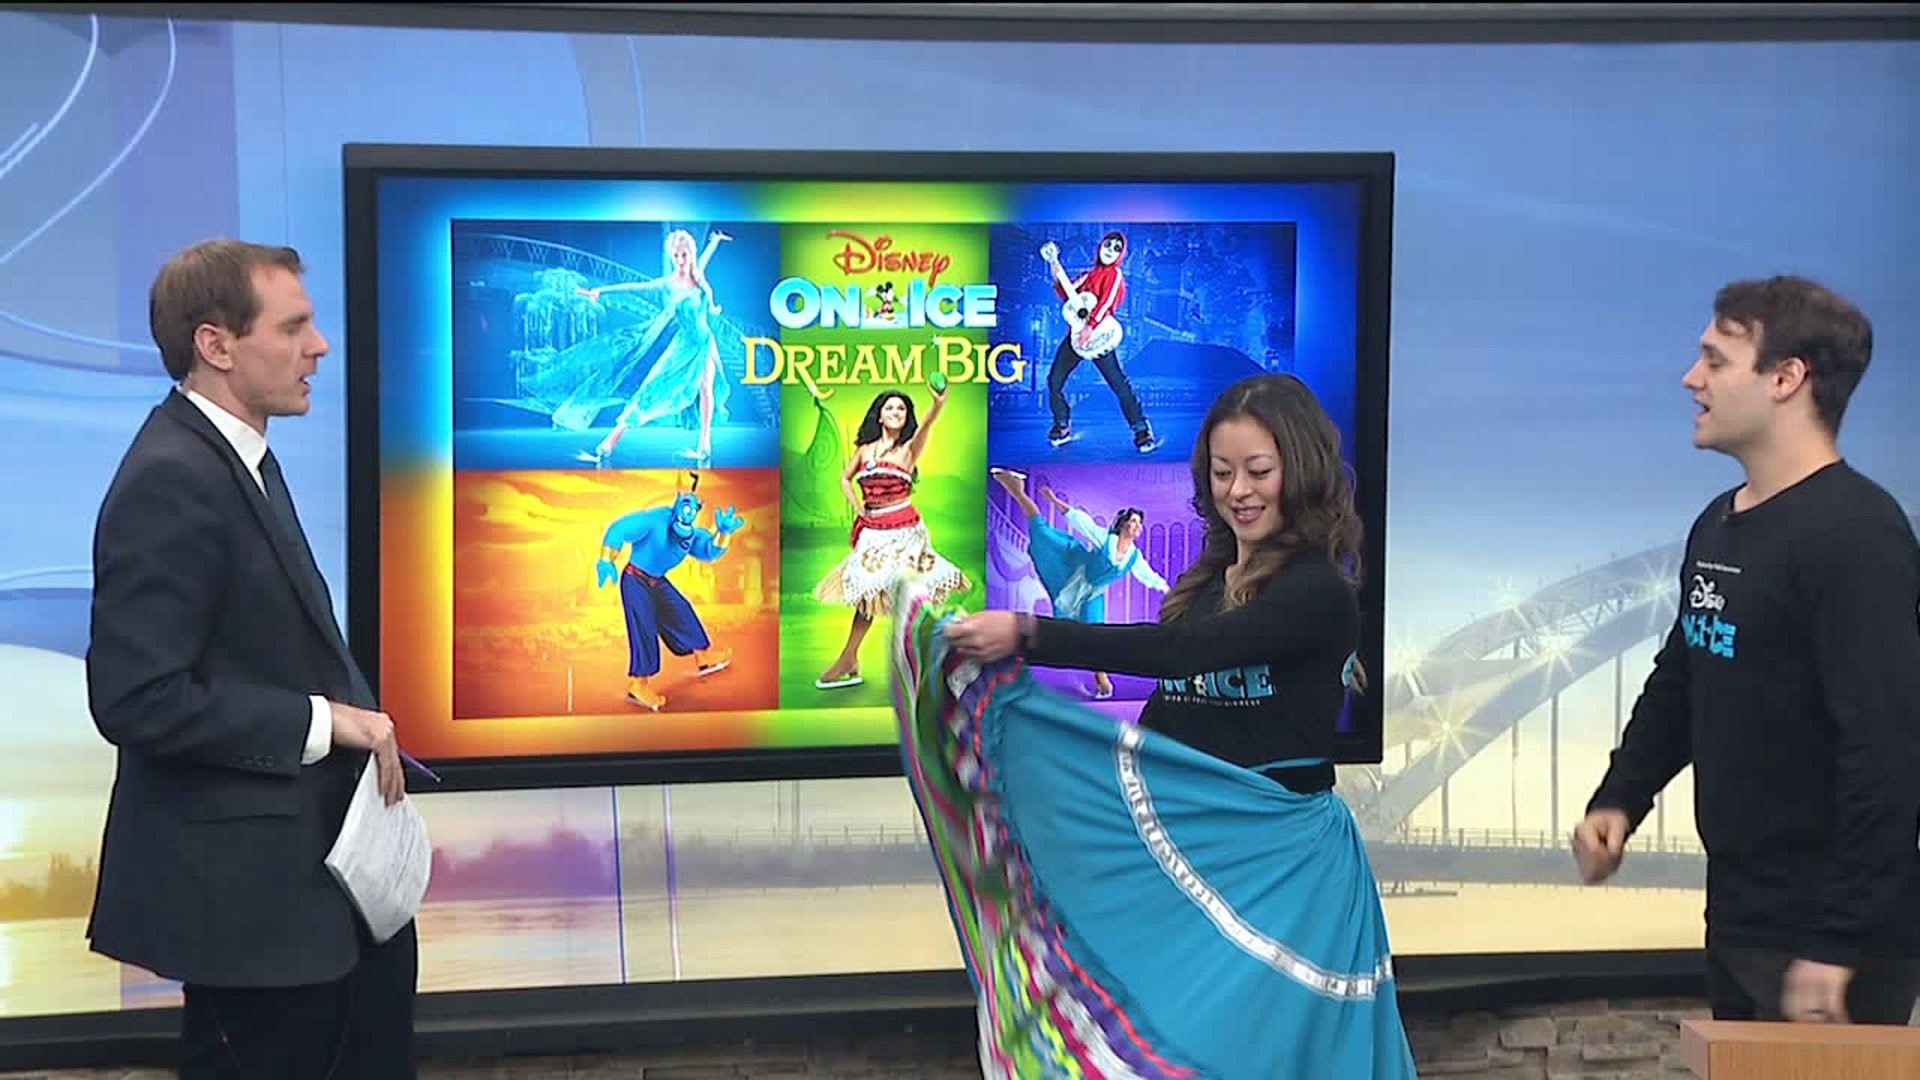 What to know what happens at Disney on Ice? Find out here